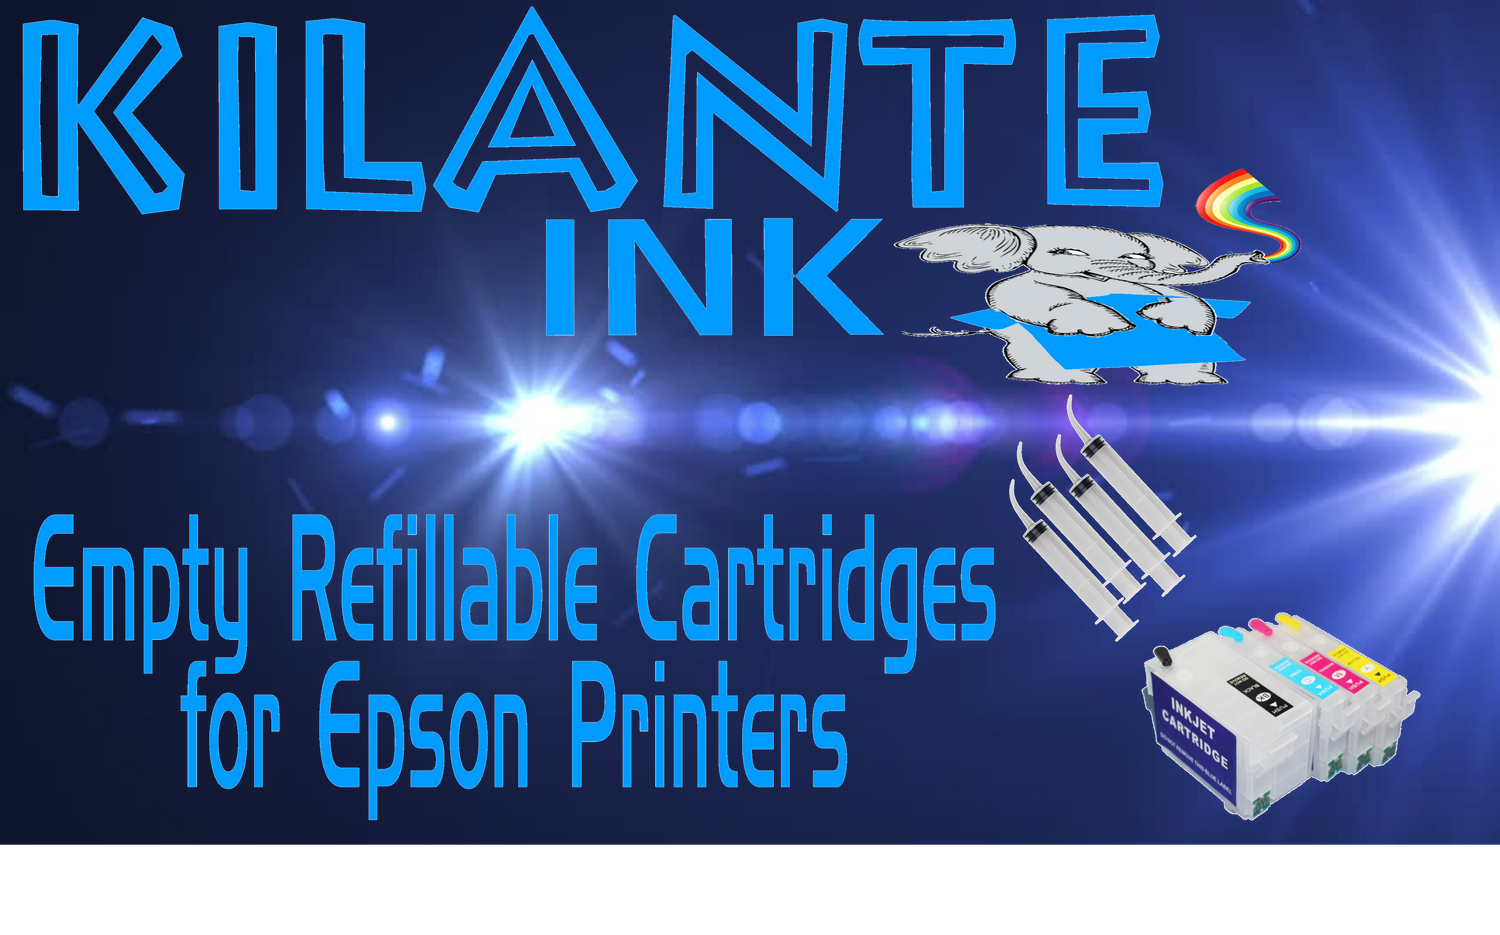 Empty Refillable Cartridges for Epson Printers